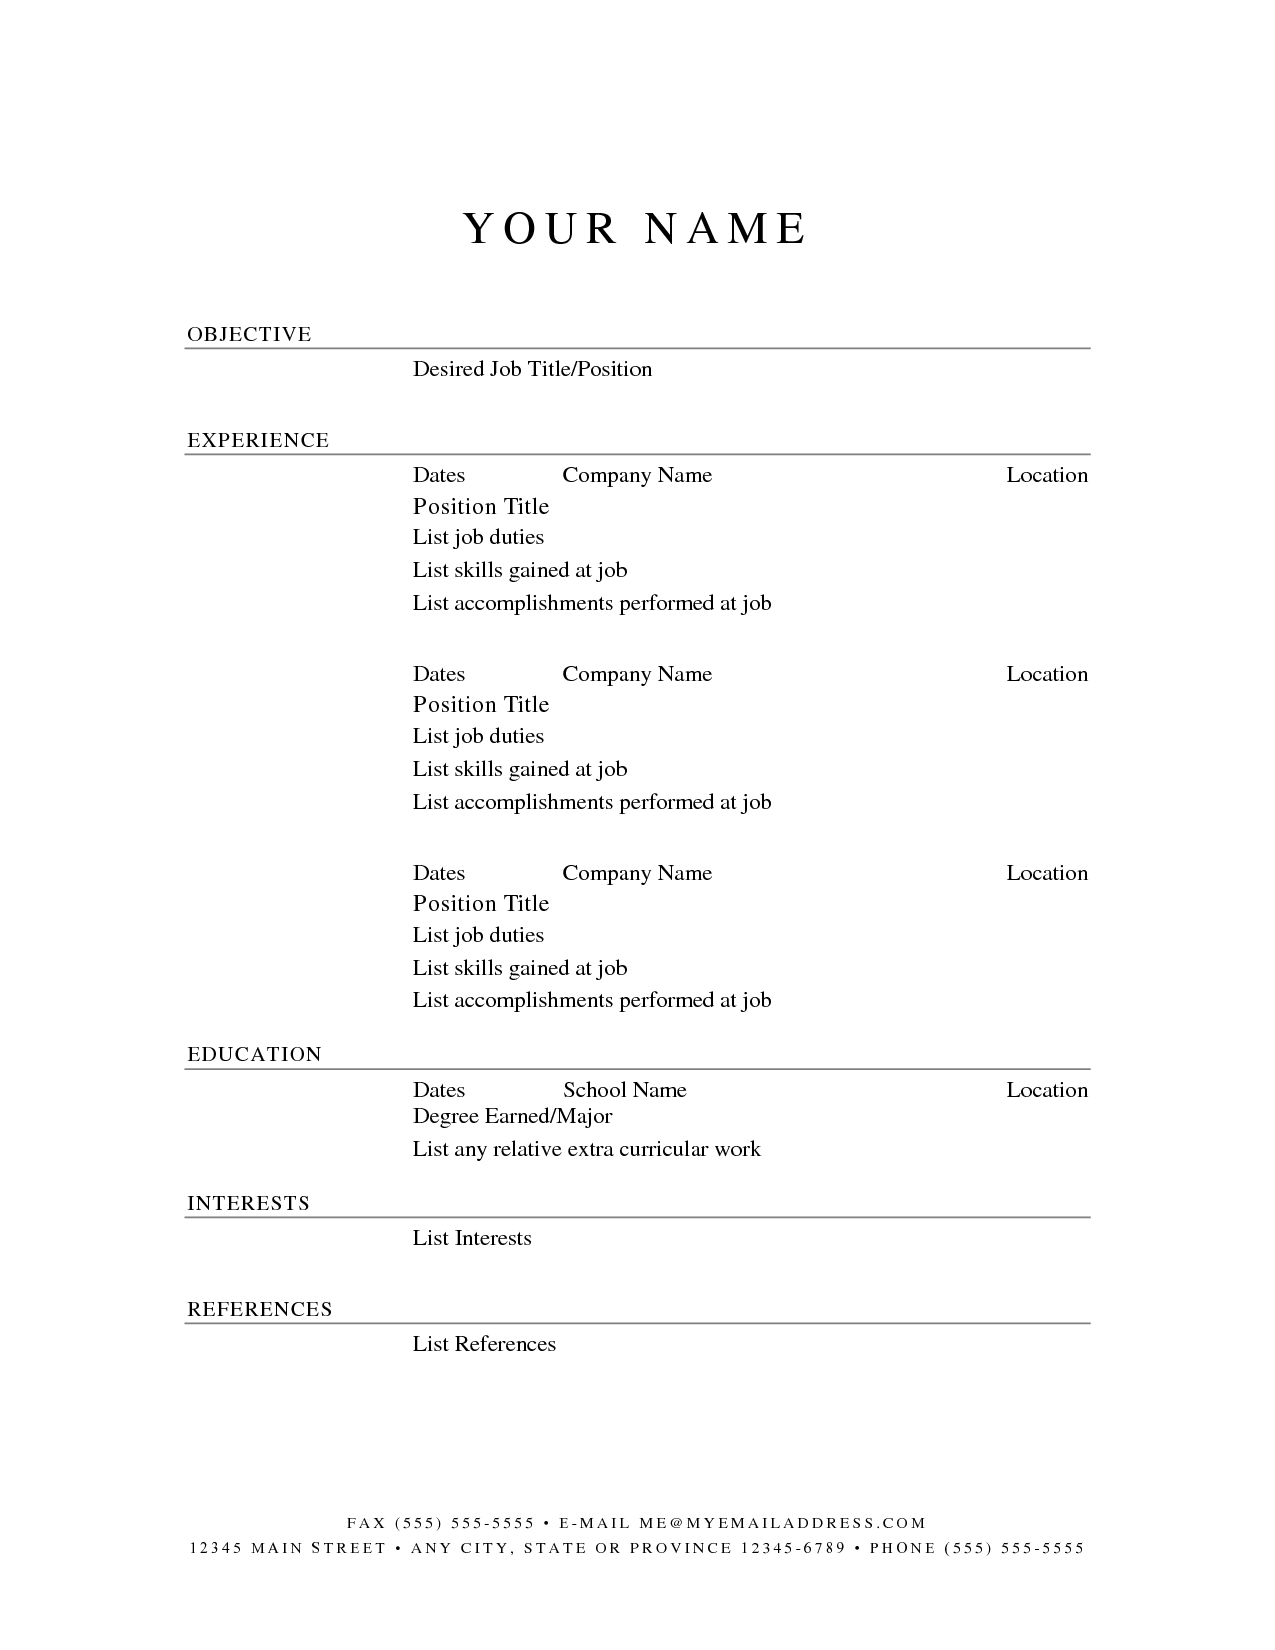 Simple Blank Resume Format - Demir.iso-Consulting.co - Free Blank Resume Forms Printable